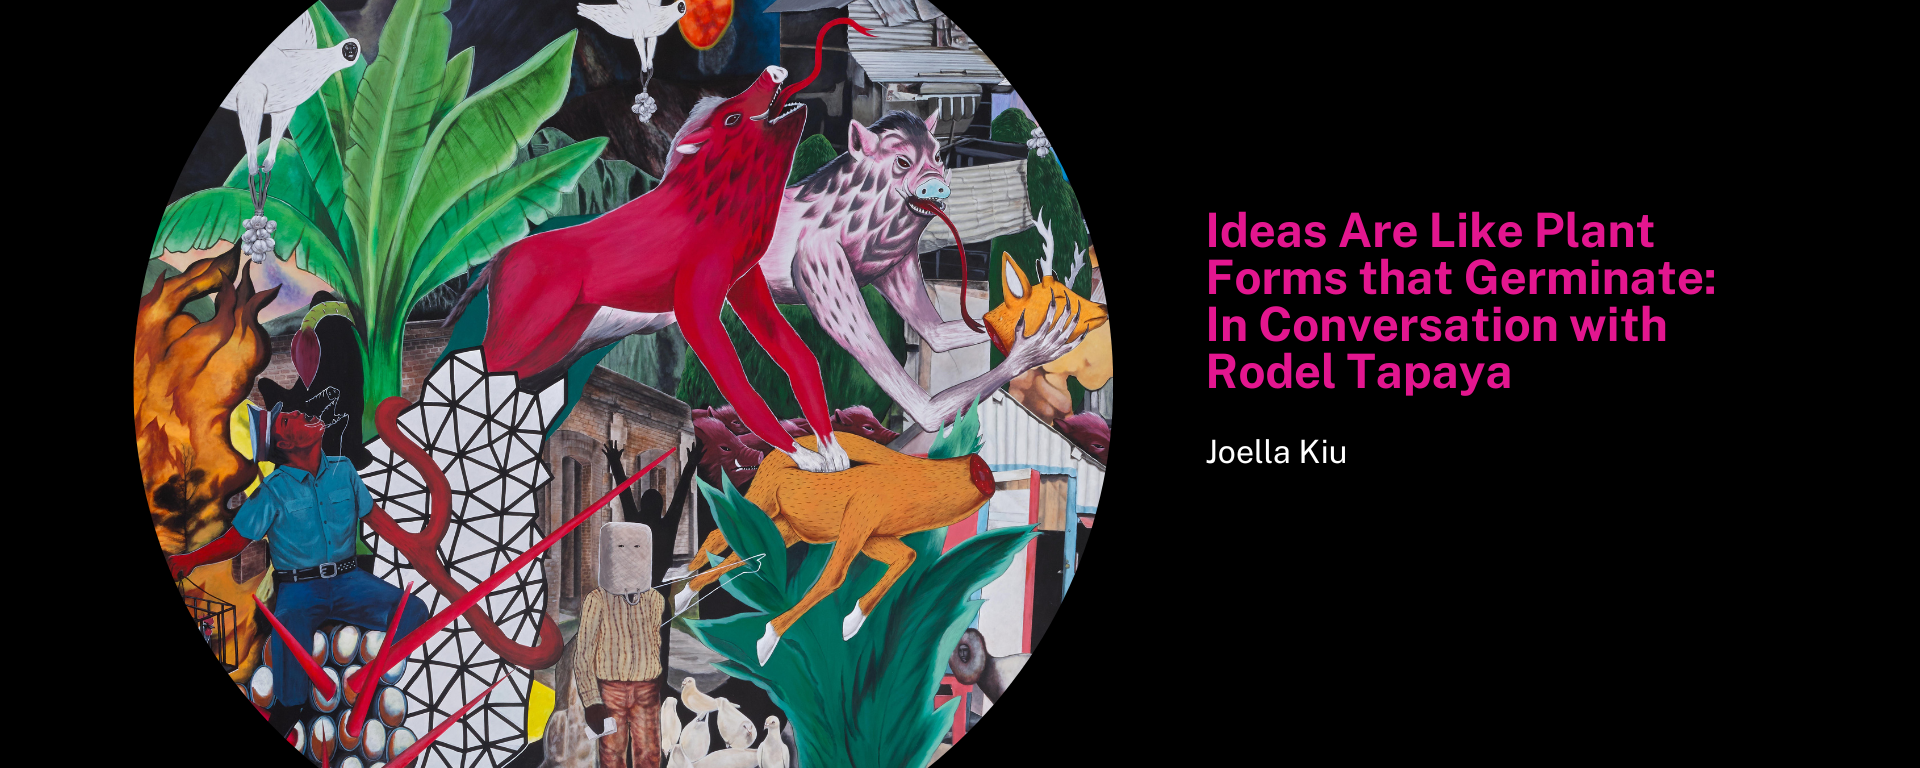 Ideas Are Like Plant Forms that Germinate: In Conversation with Rodel Tapaya